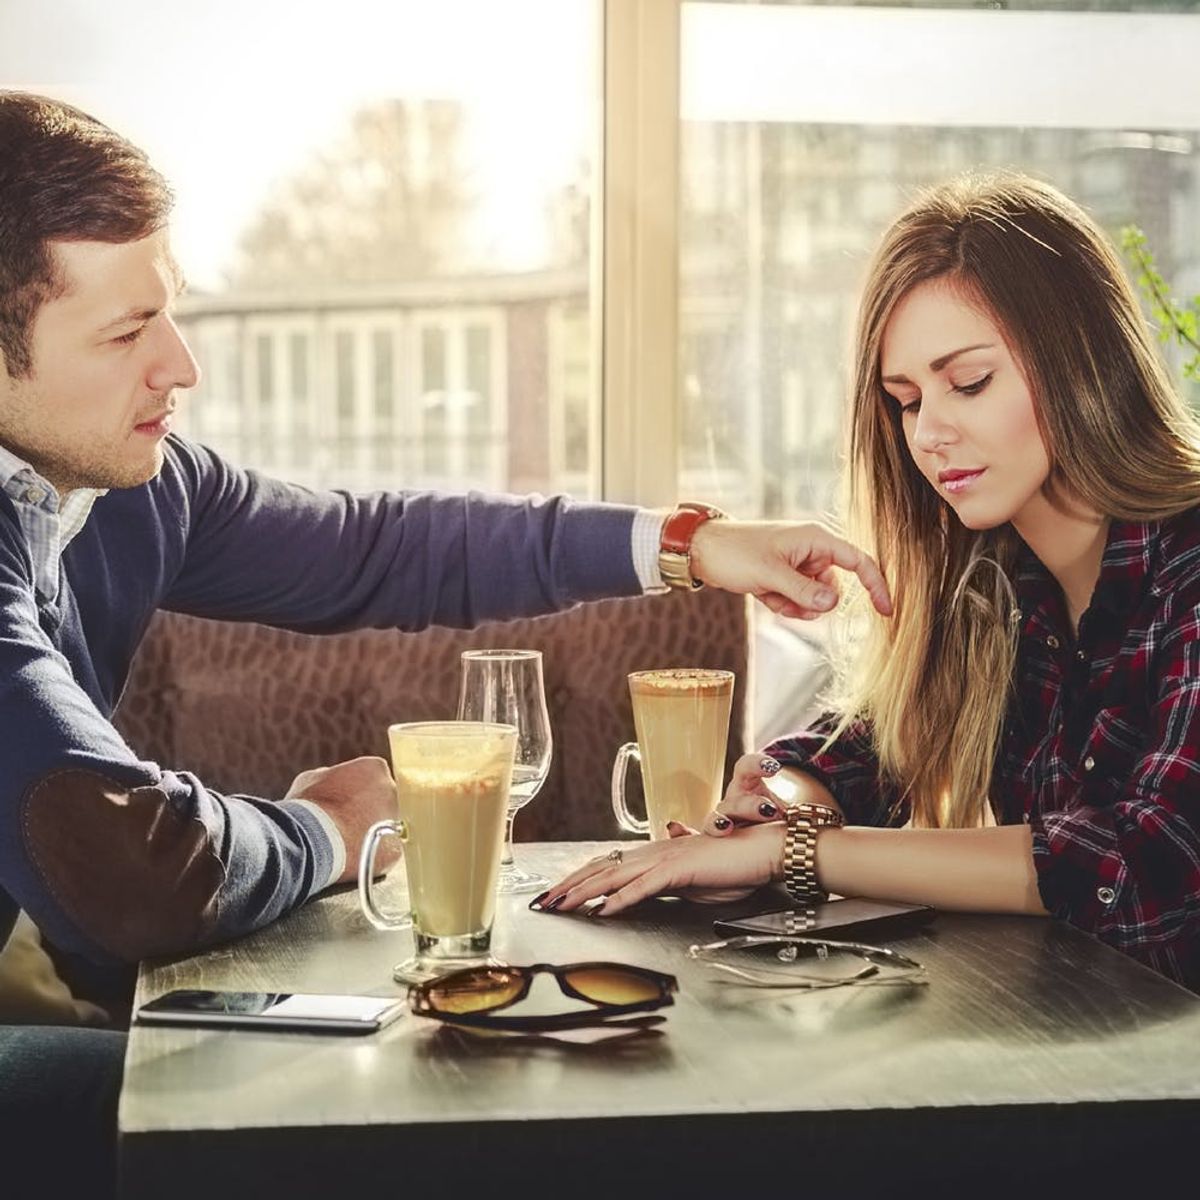 These 4 Behaviors Can Tell You If Your Relationship Is Built to Last